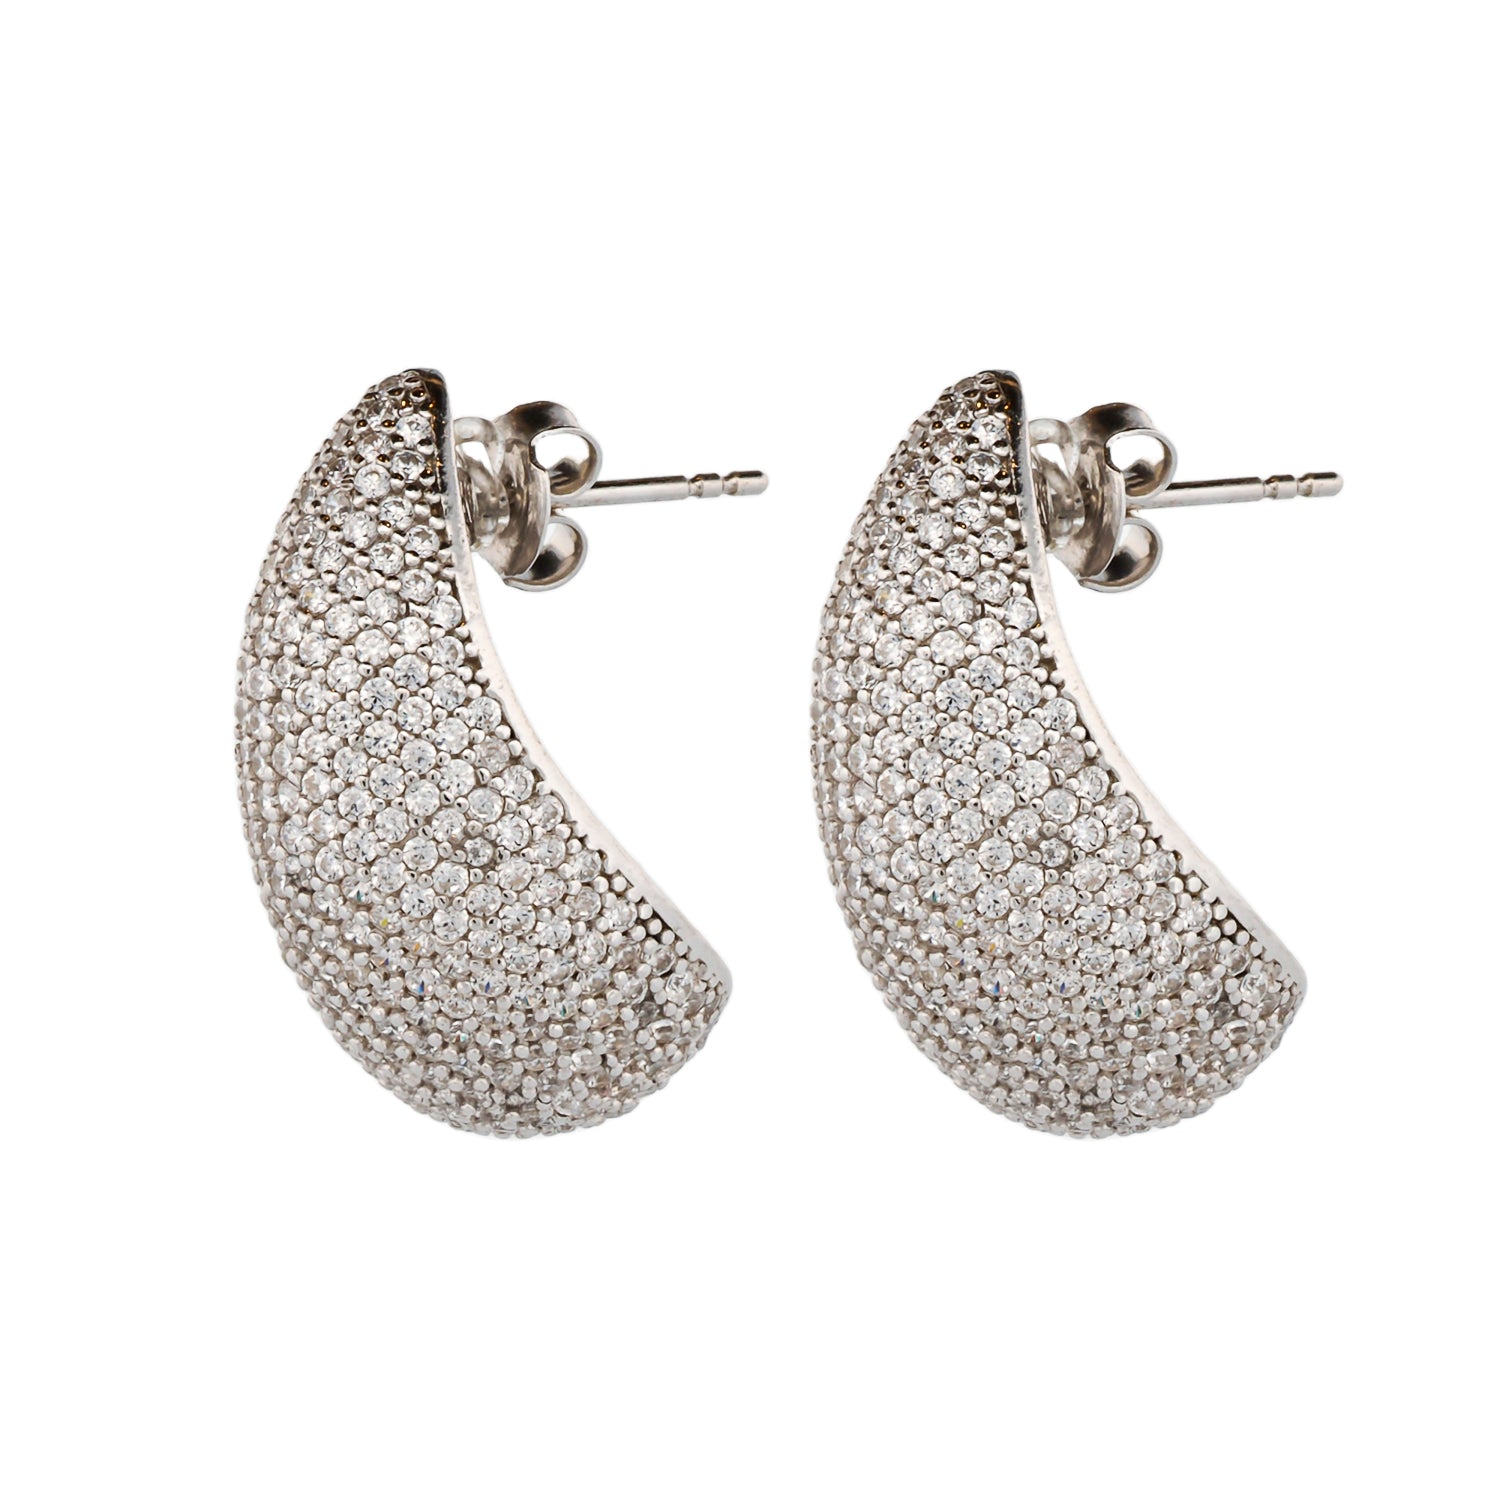 Glamour and Refinement: Sterling Silver & Cz Diamond Earrings